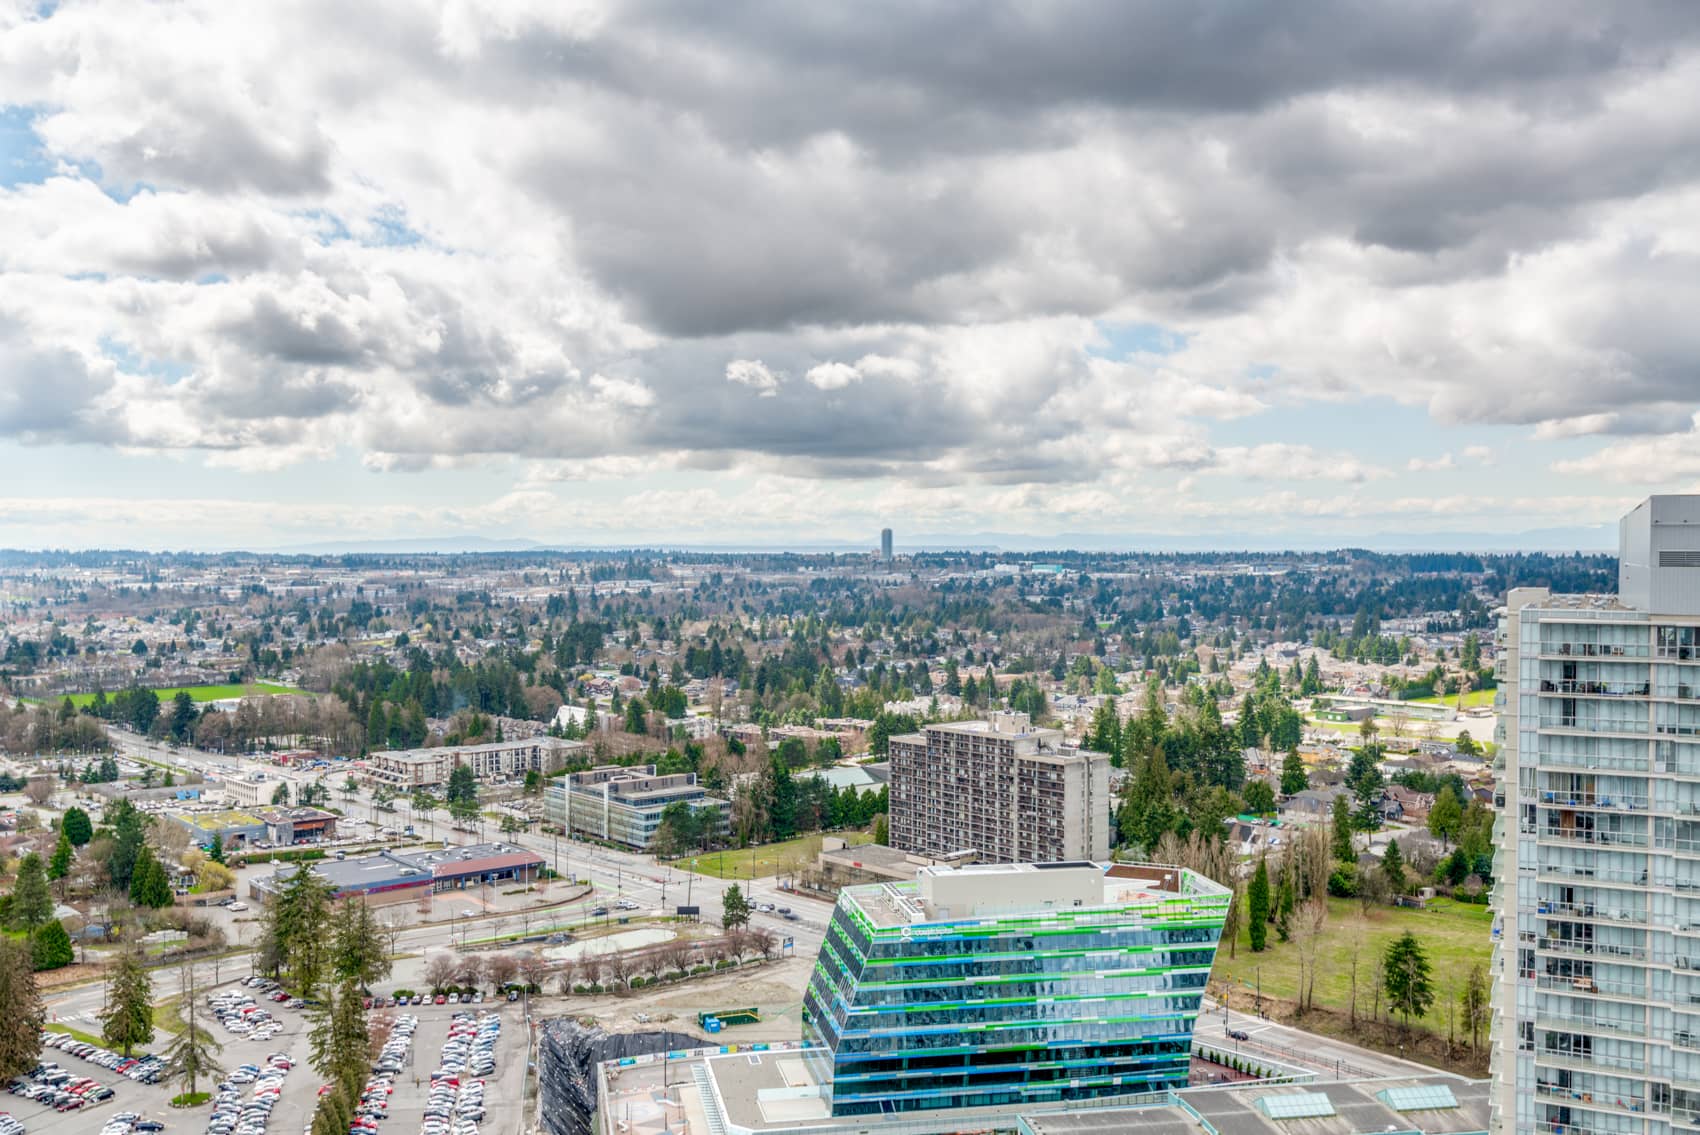 Penthouse Condo at Park Ave in Surrey